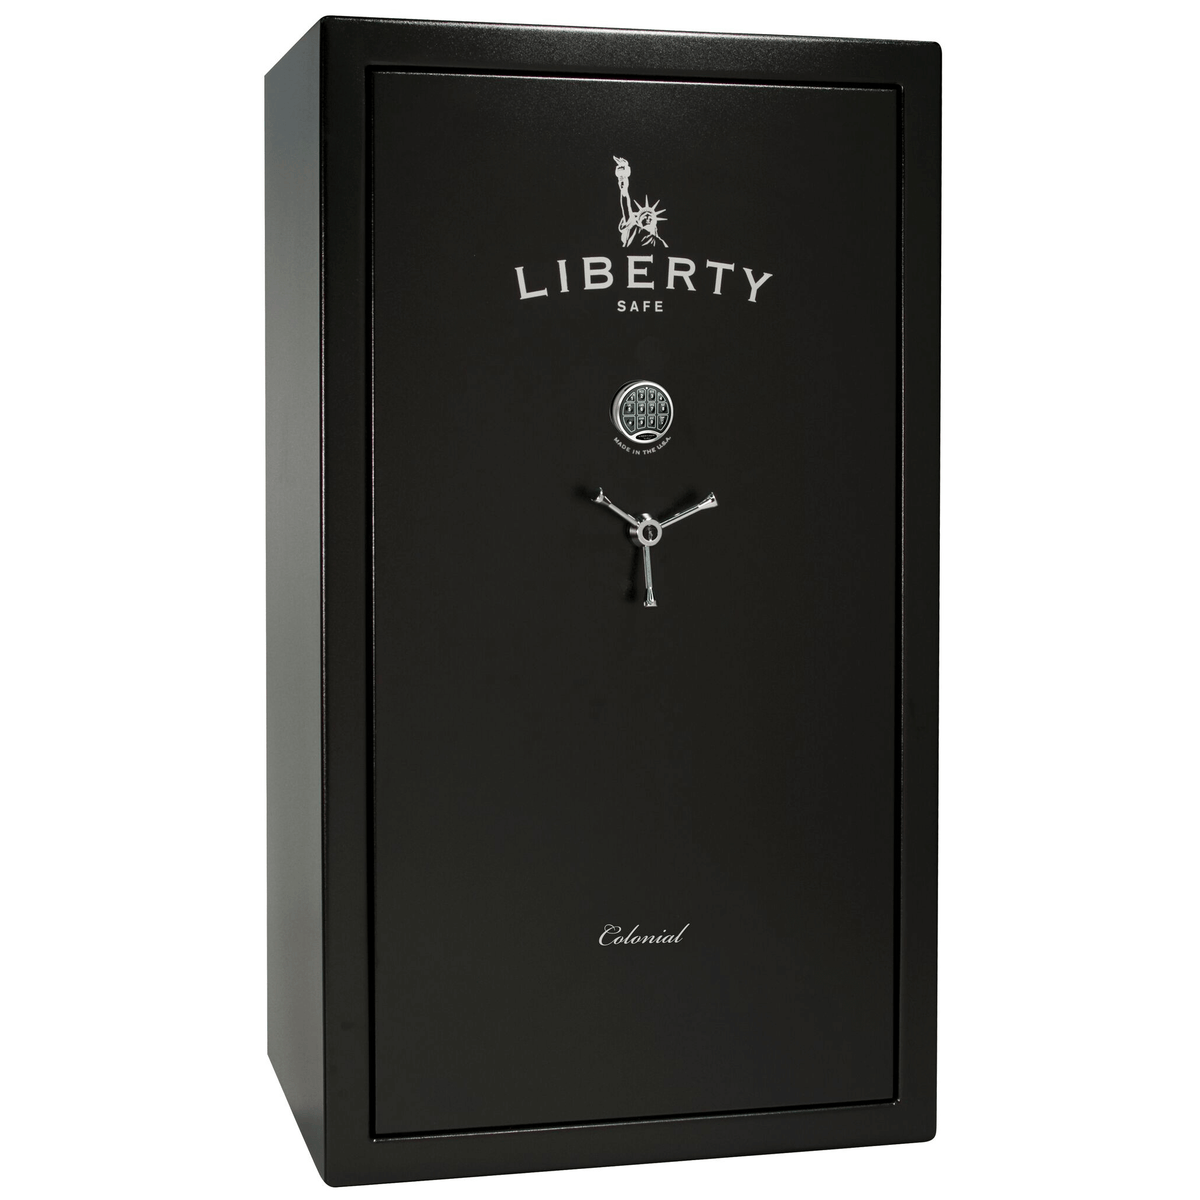 Liberty Colonial 50 Safe in Textured Black with Chrome Electronic Lock.